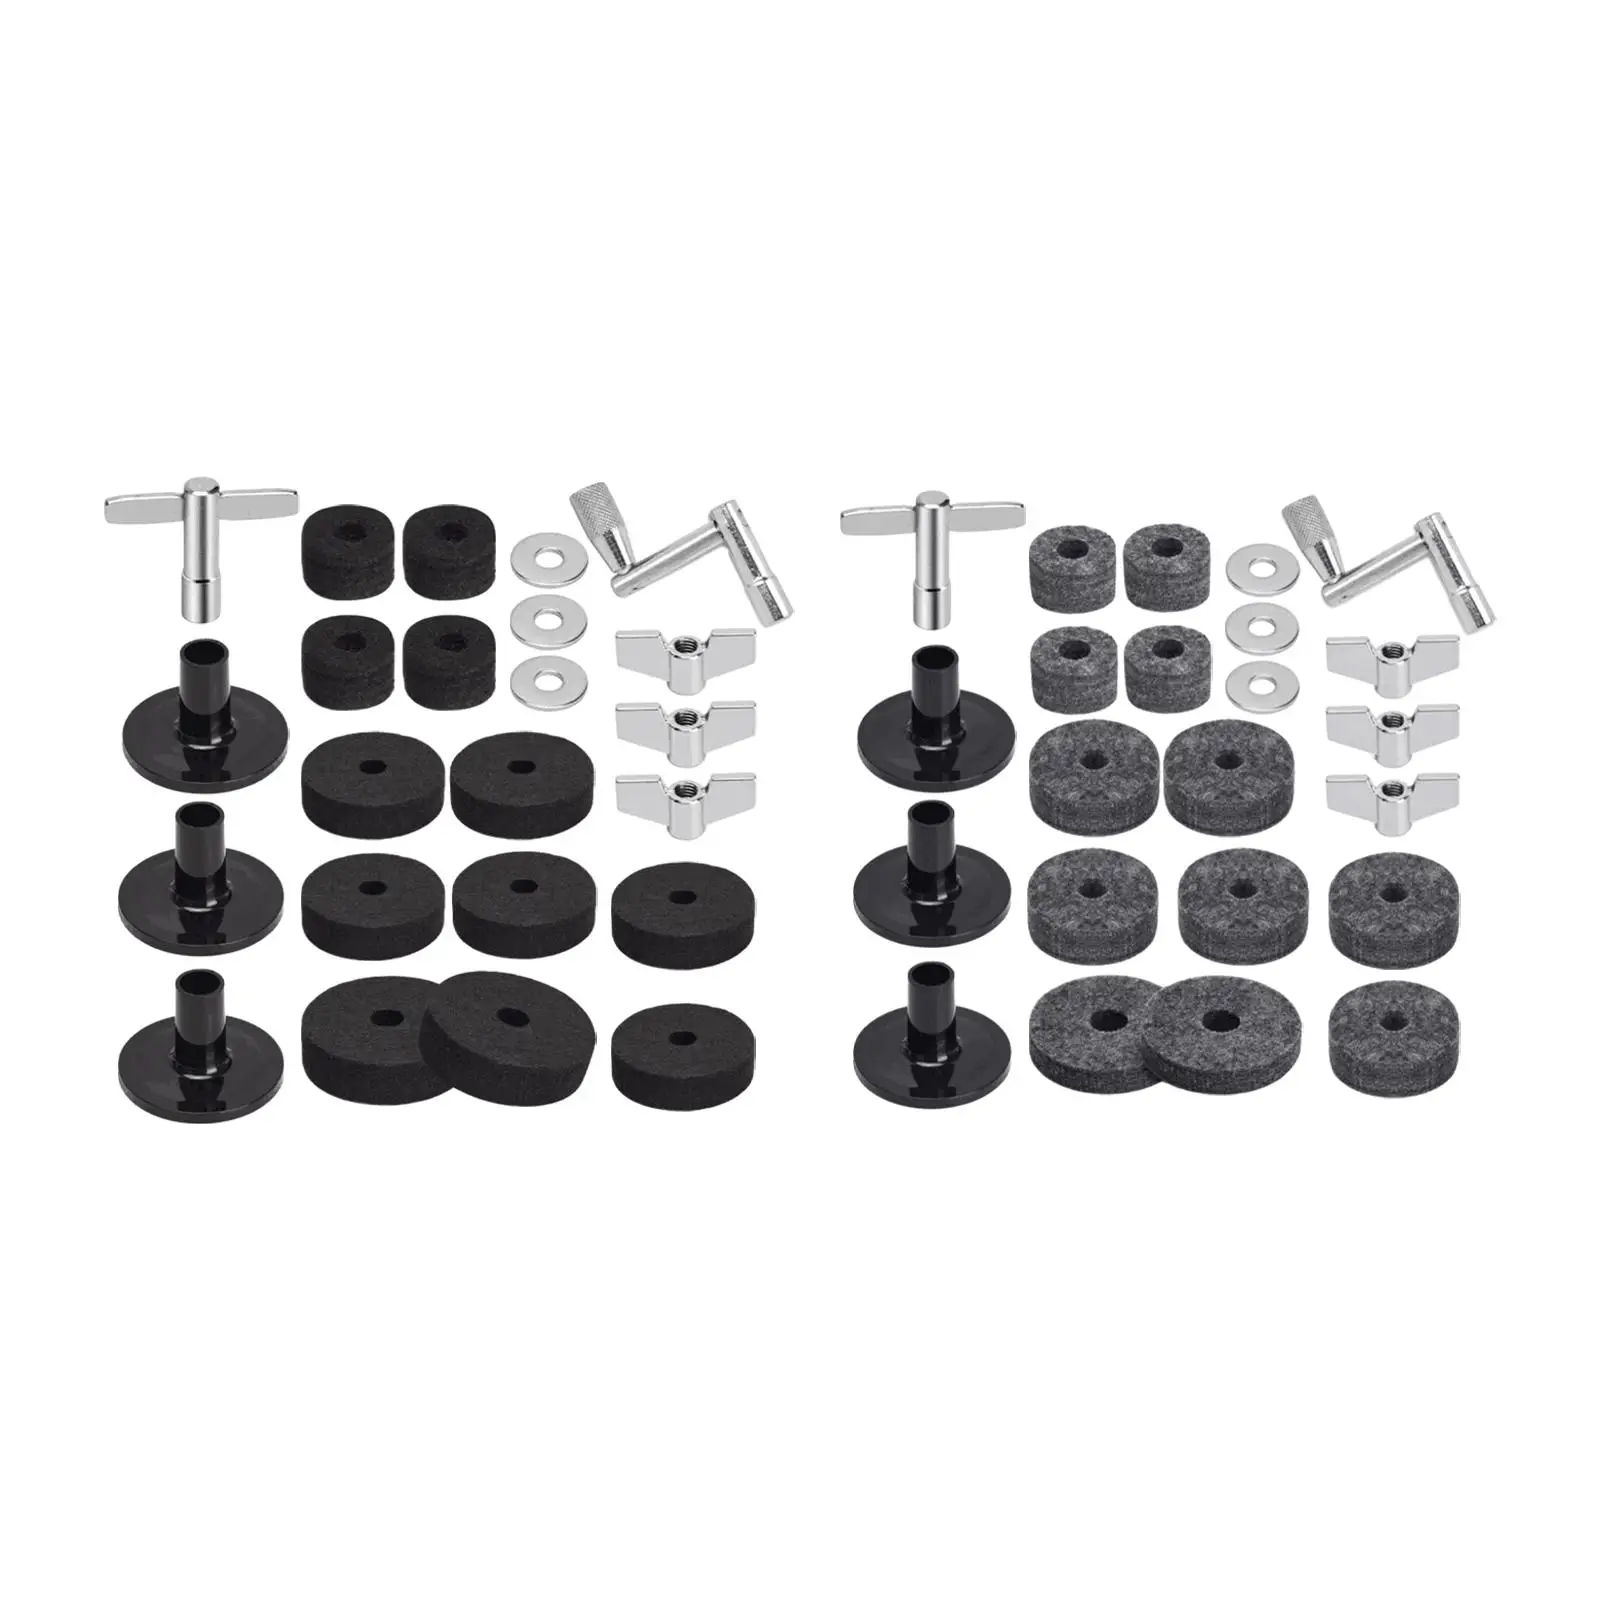 23x Cymbal Replacement Accessories, High Hat Clutch Cup Felt Portable Percussion Instrument Parts Washers Cymbal Support